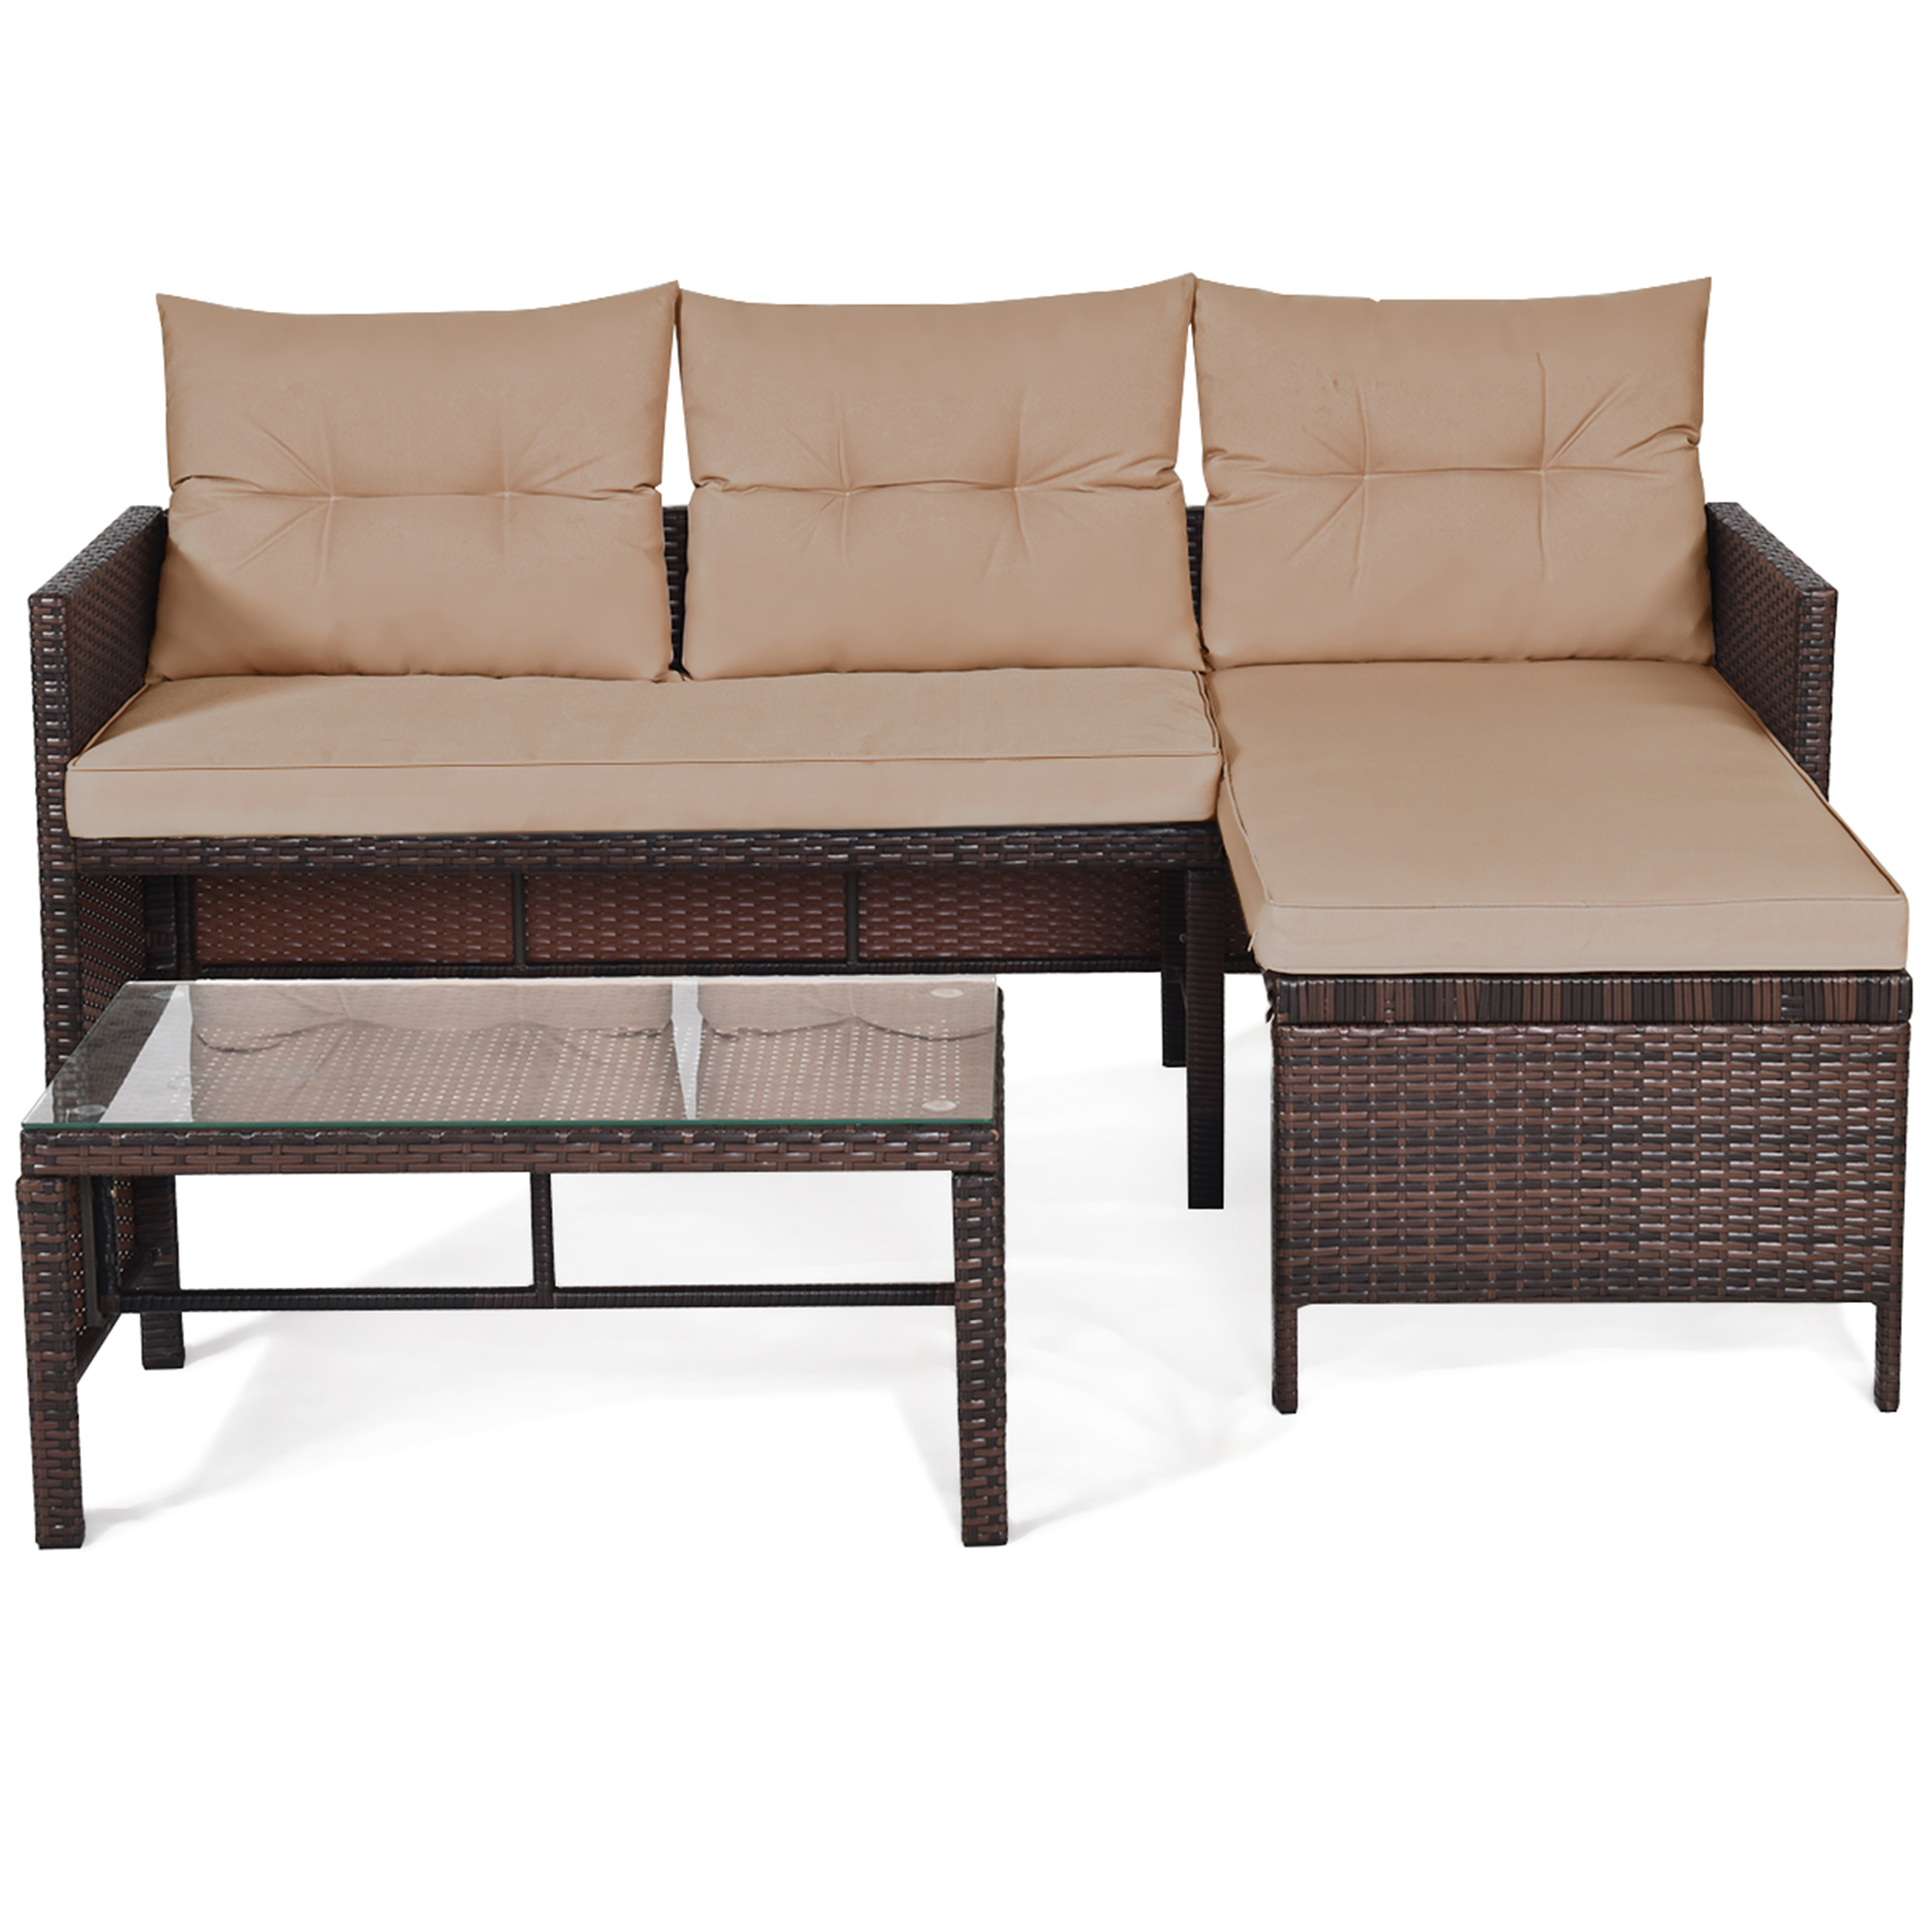 Gymax 3PCS Outdoor Rattan Furniture Set Patio Couch Sofa Set w/ Coffee Table - image 4 of 10